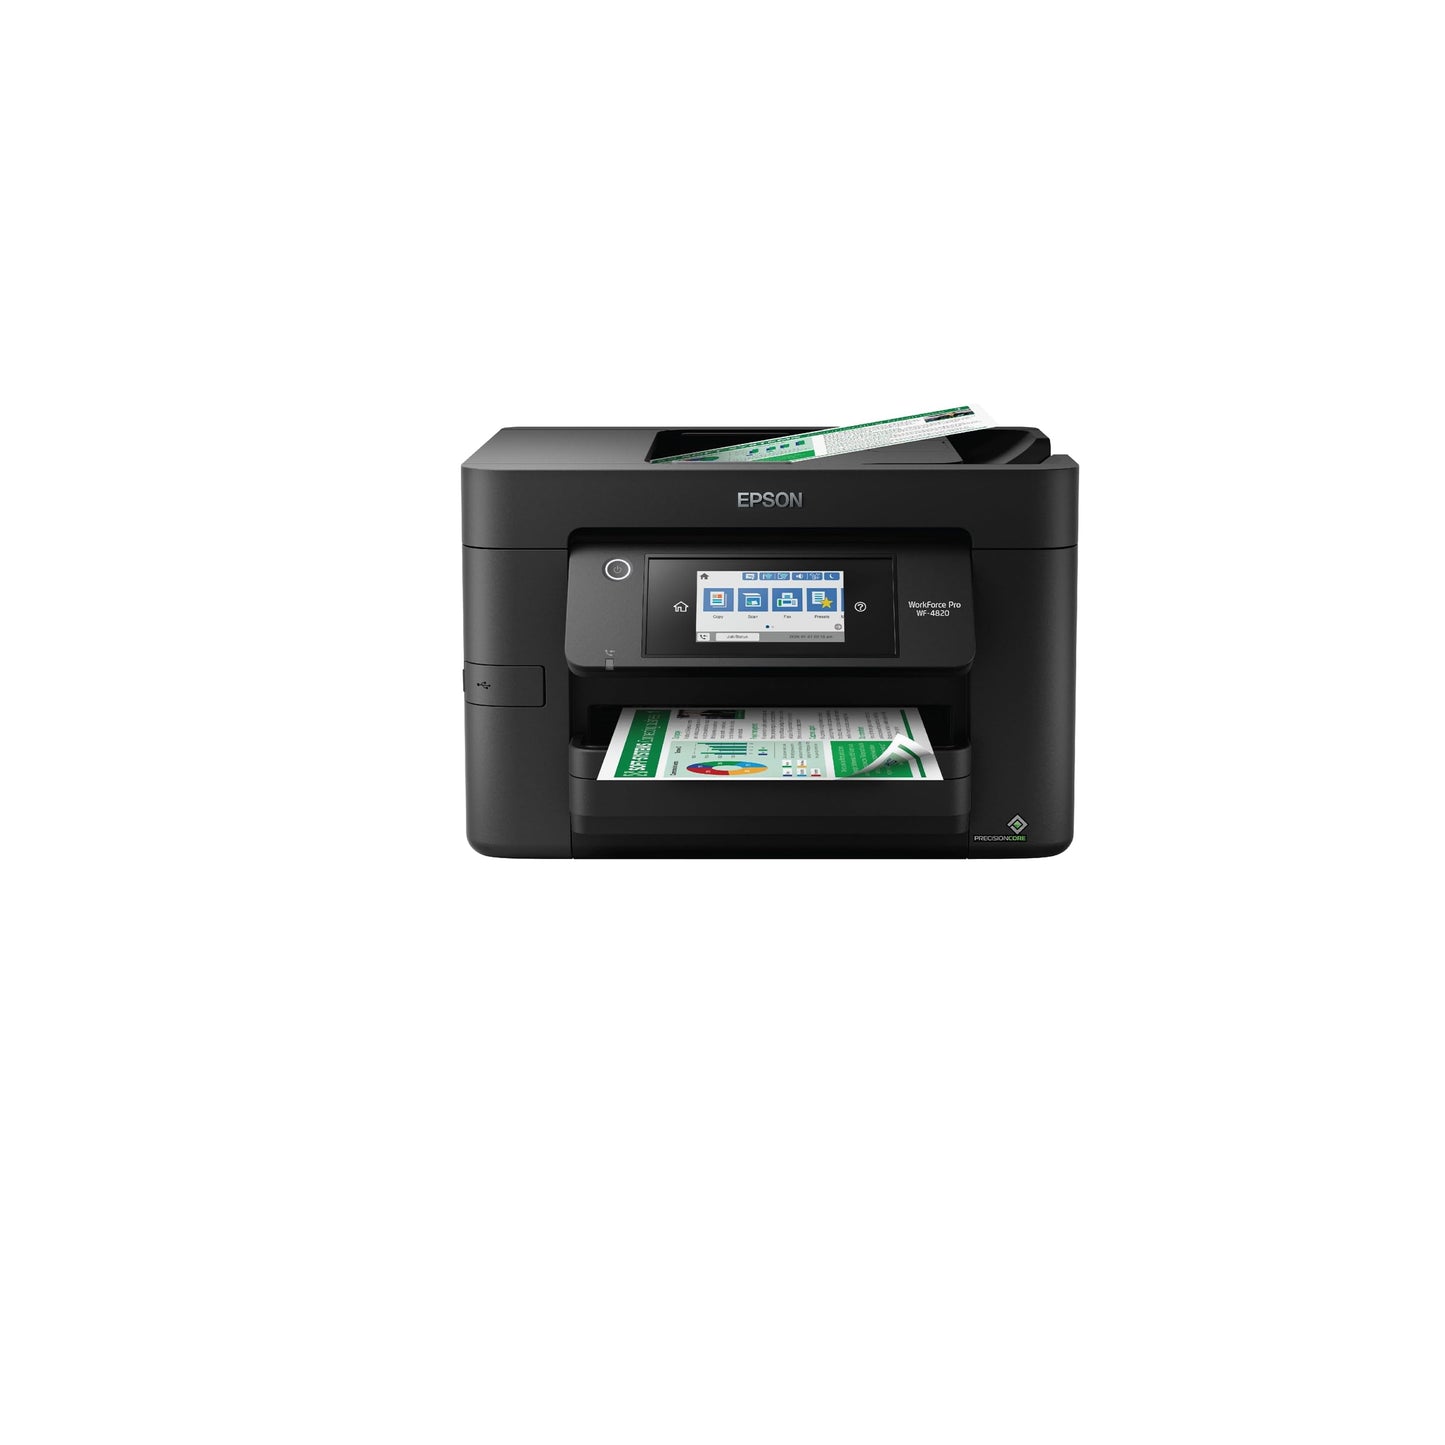 Epson Workforce Pro WF-4820 Wireless All-in-One Printer with Auto 2-Sided Printing, 35-Page ADF, 250-sheet Paper Tray and 4.3" Color Touchscreen (Renewed), Large Black